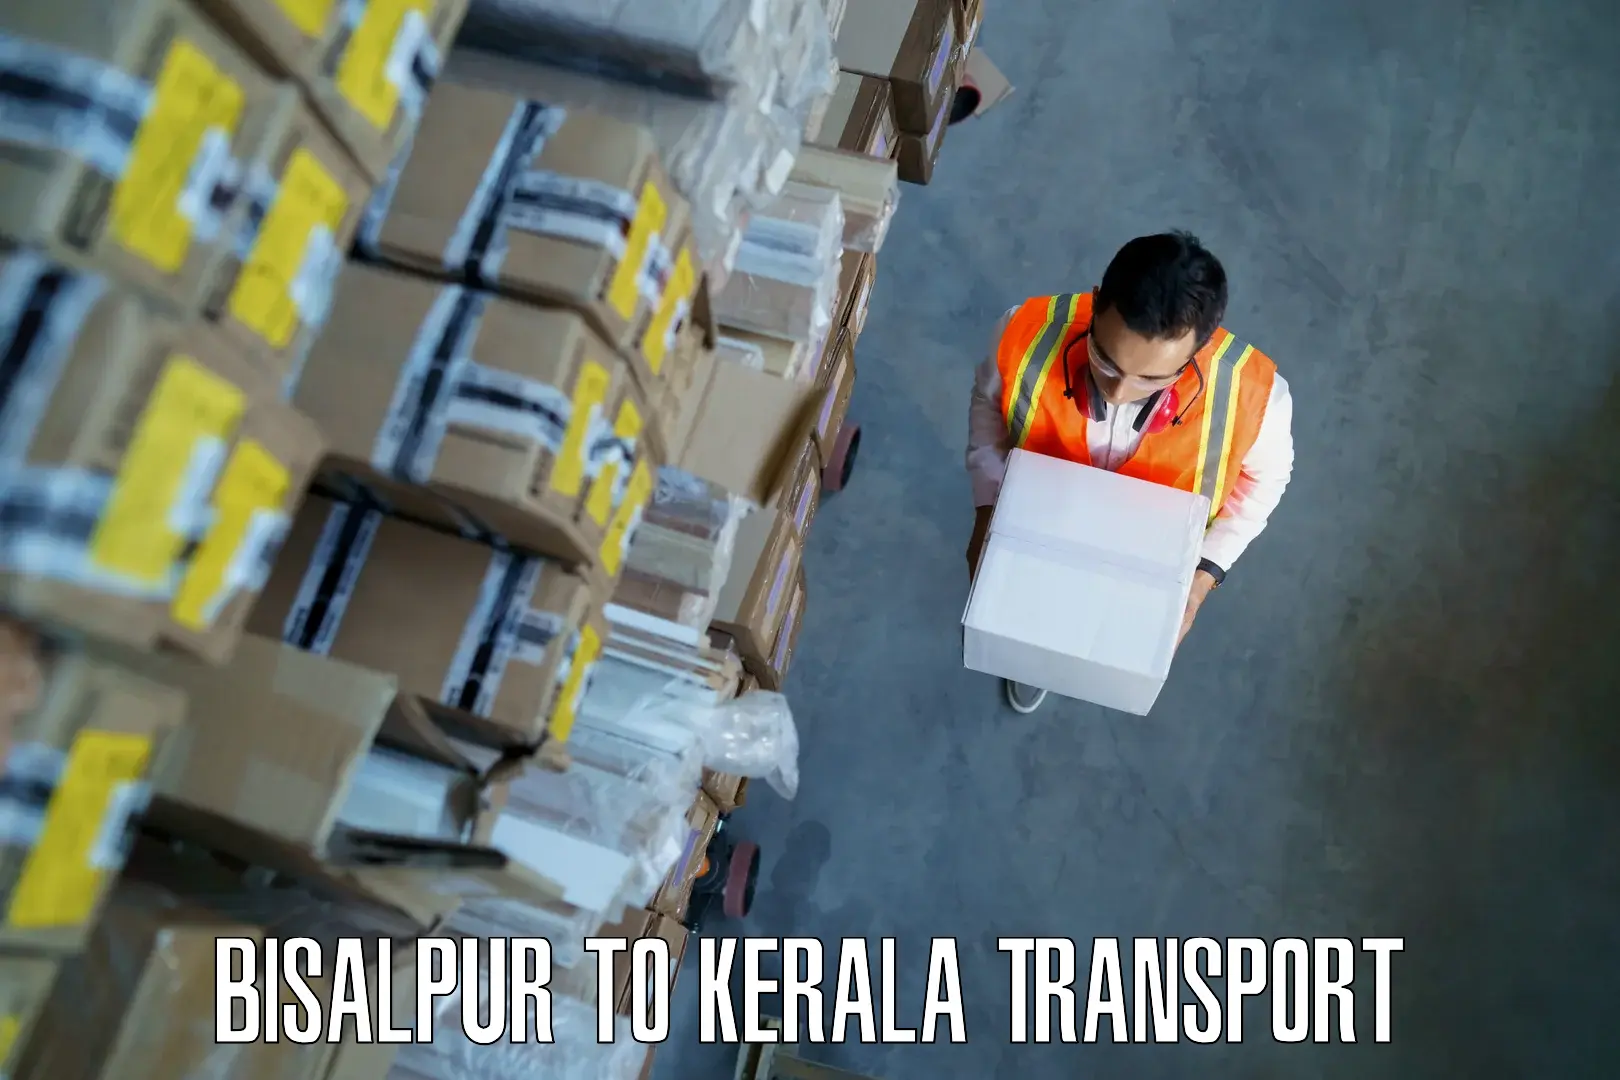 Commercial transport service Bisalpur to Nallepilly